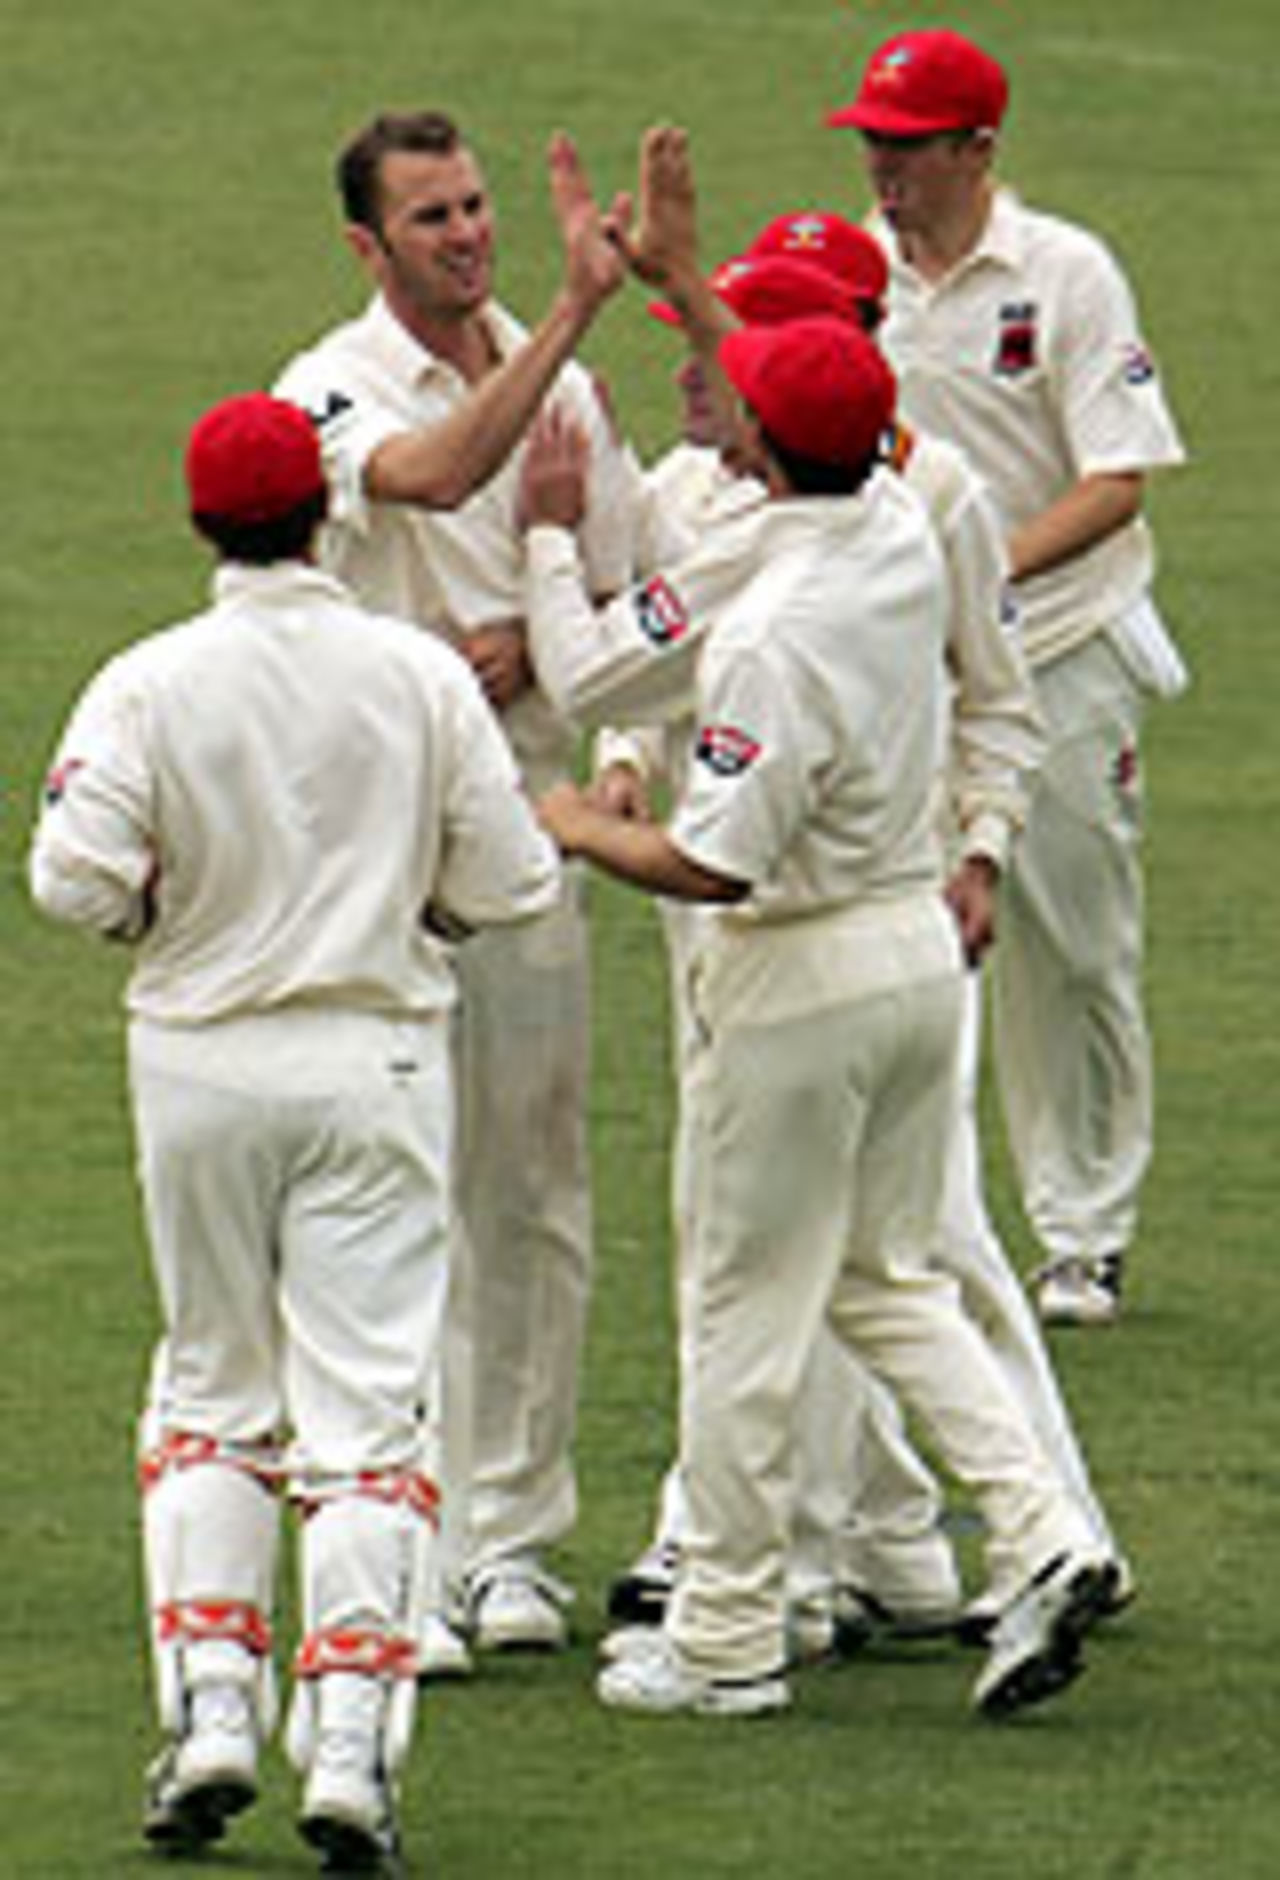 Paul Rofe takes another wicket, South Australia v Queensland, Adelaide Oval, November 11, 2004